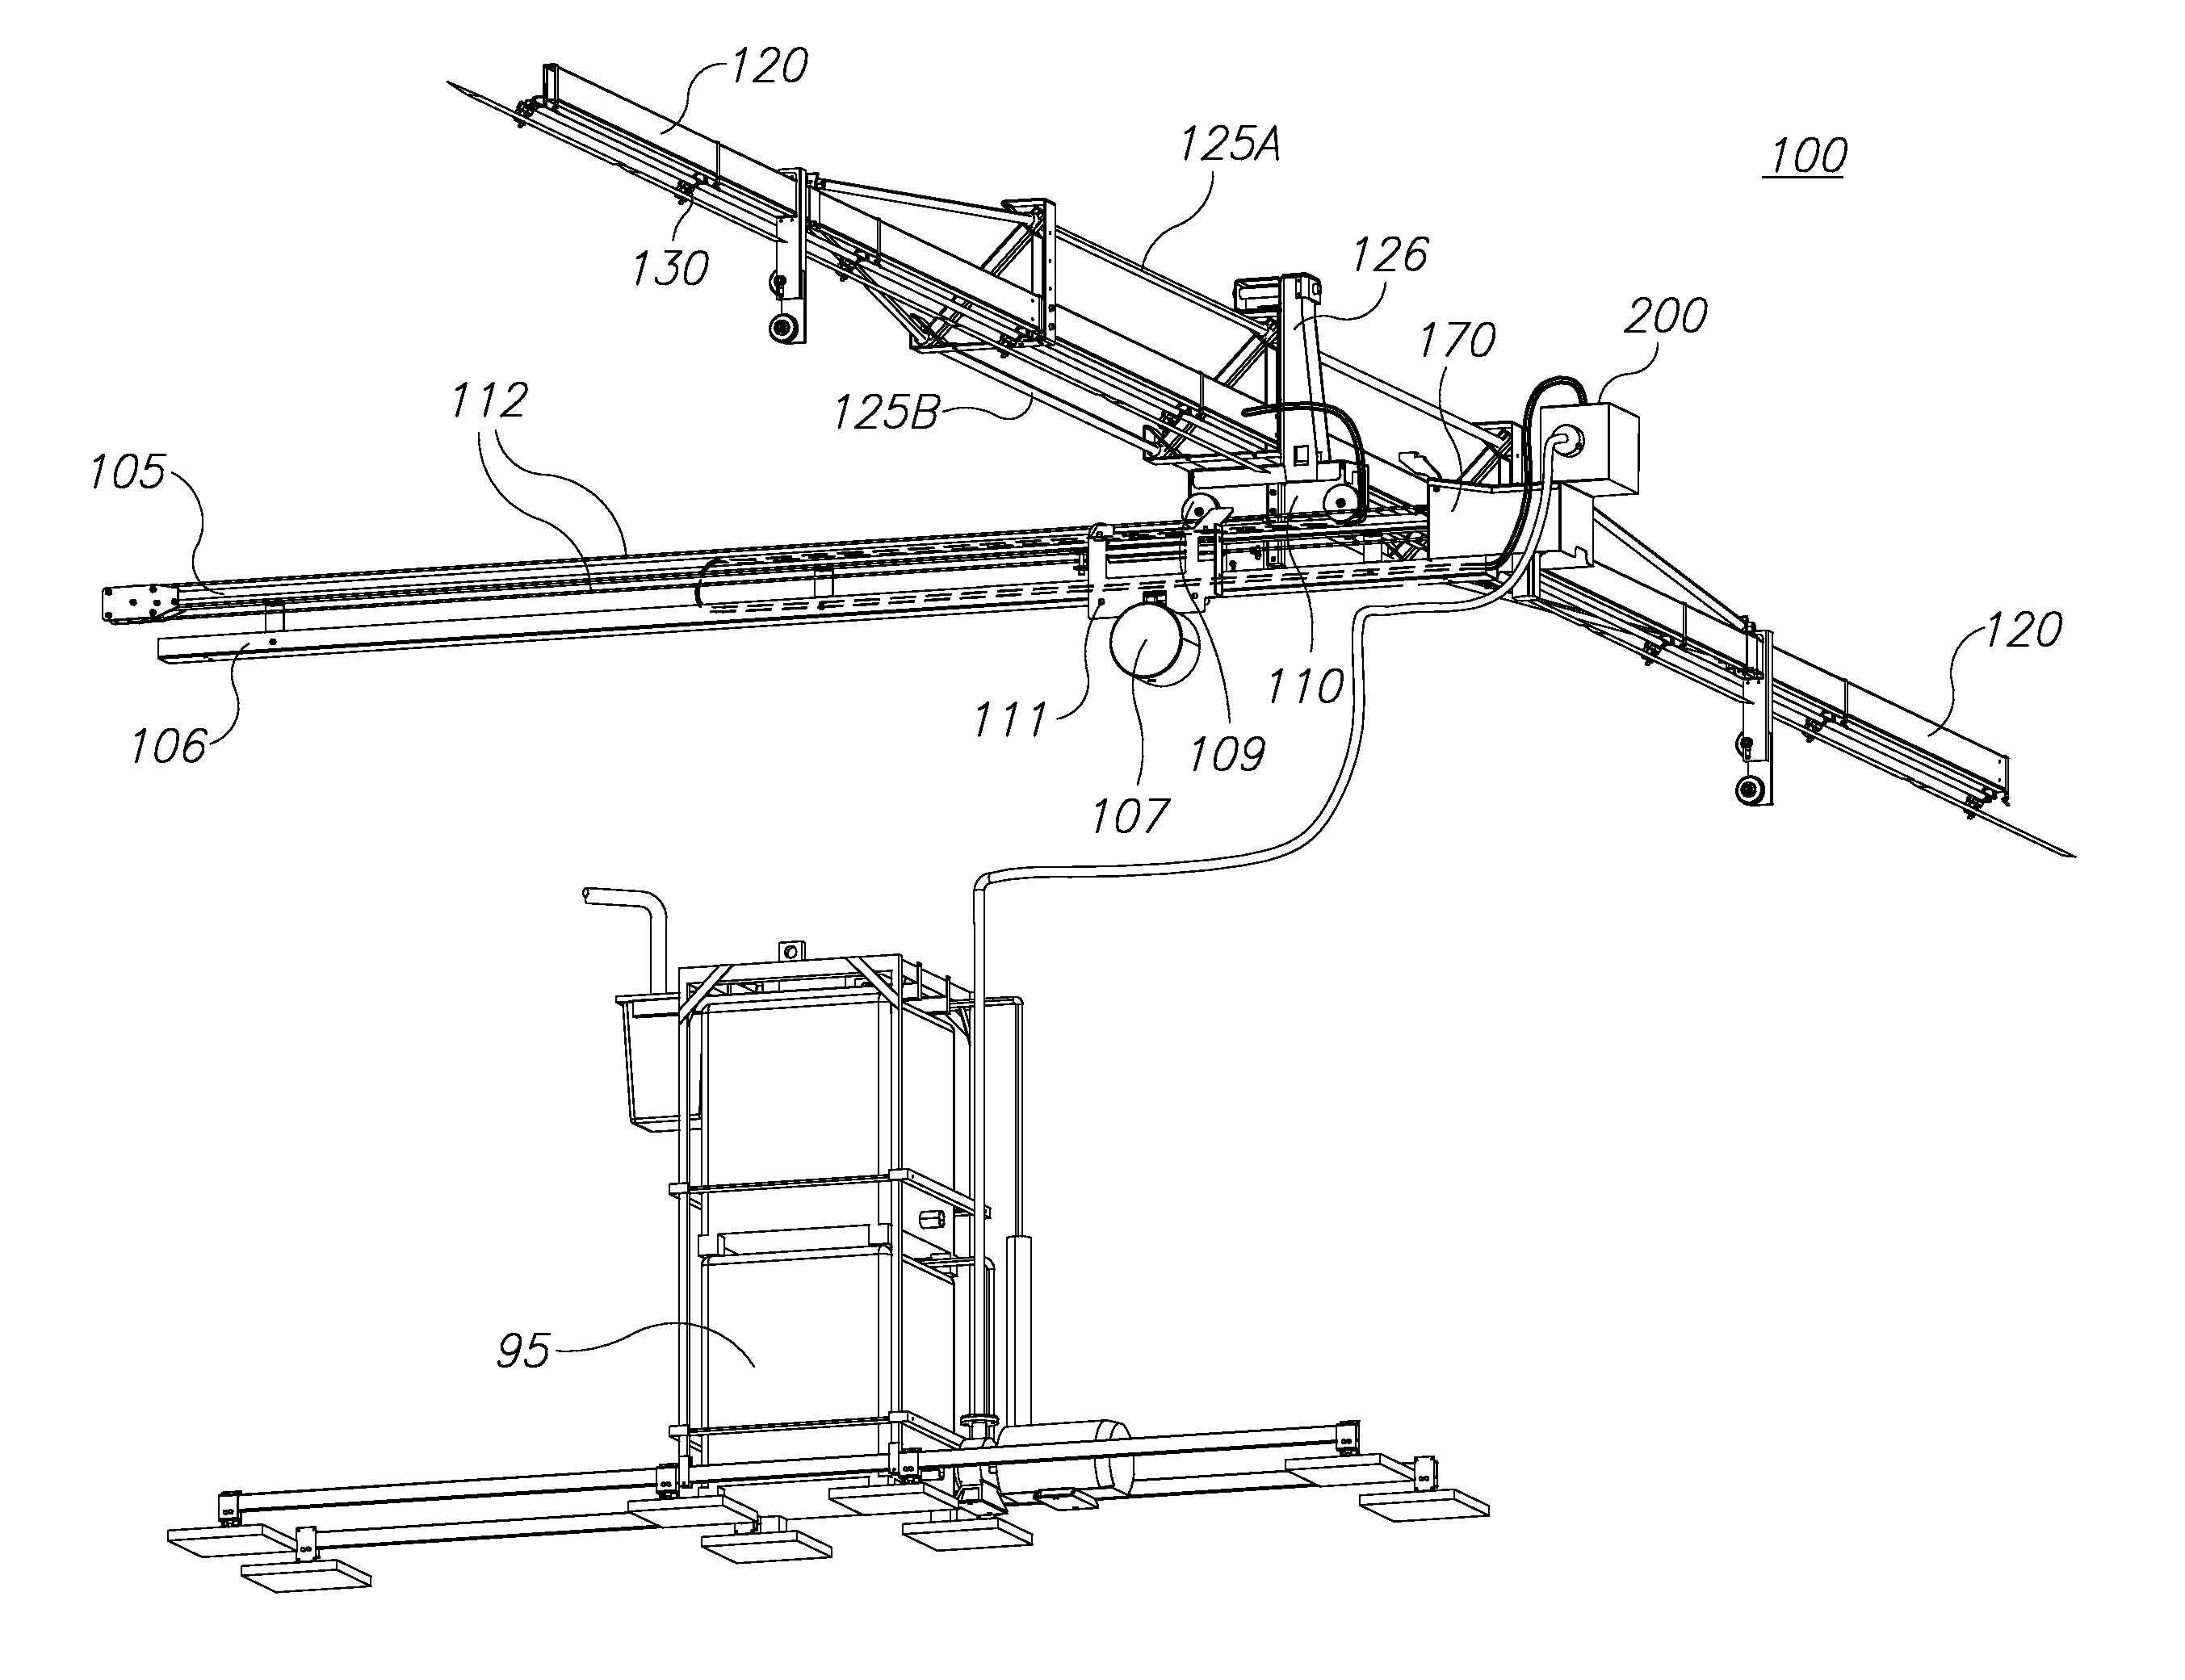 Cooling and washing system